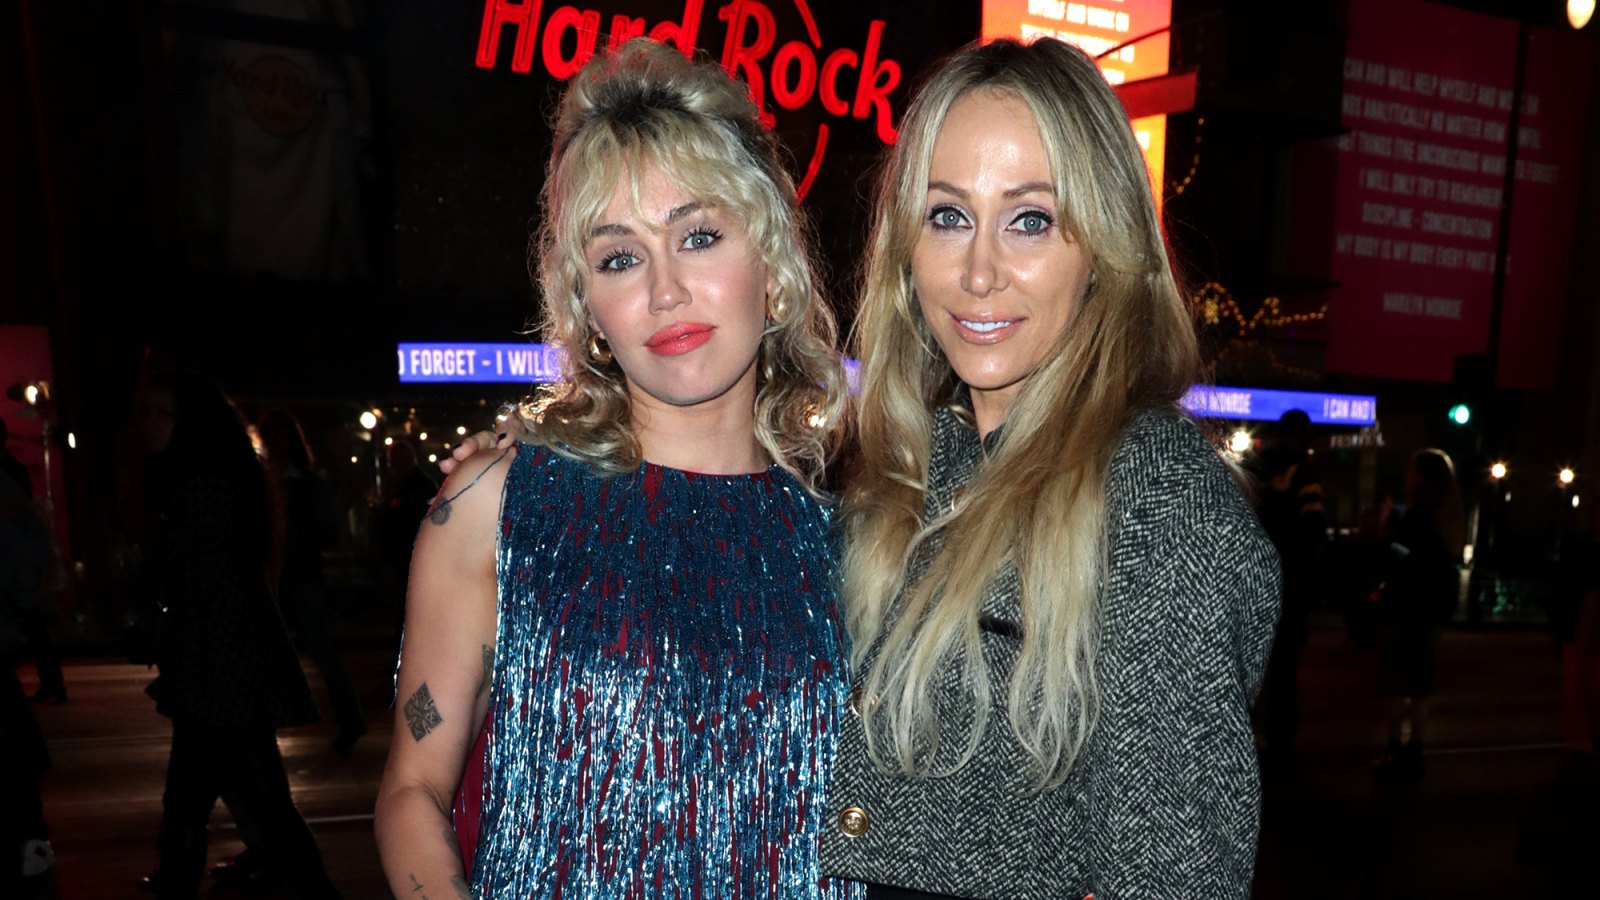 Miley Cyrus Got ‘Very Emotional’ Walking Mom Tish Down the Aisle During Dominic Purcell Wedding